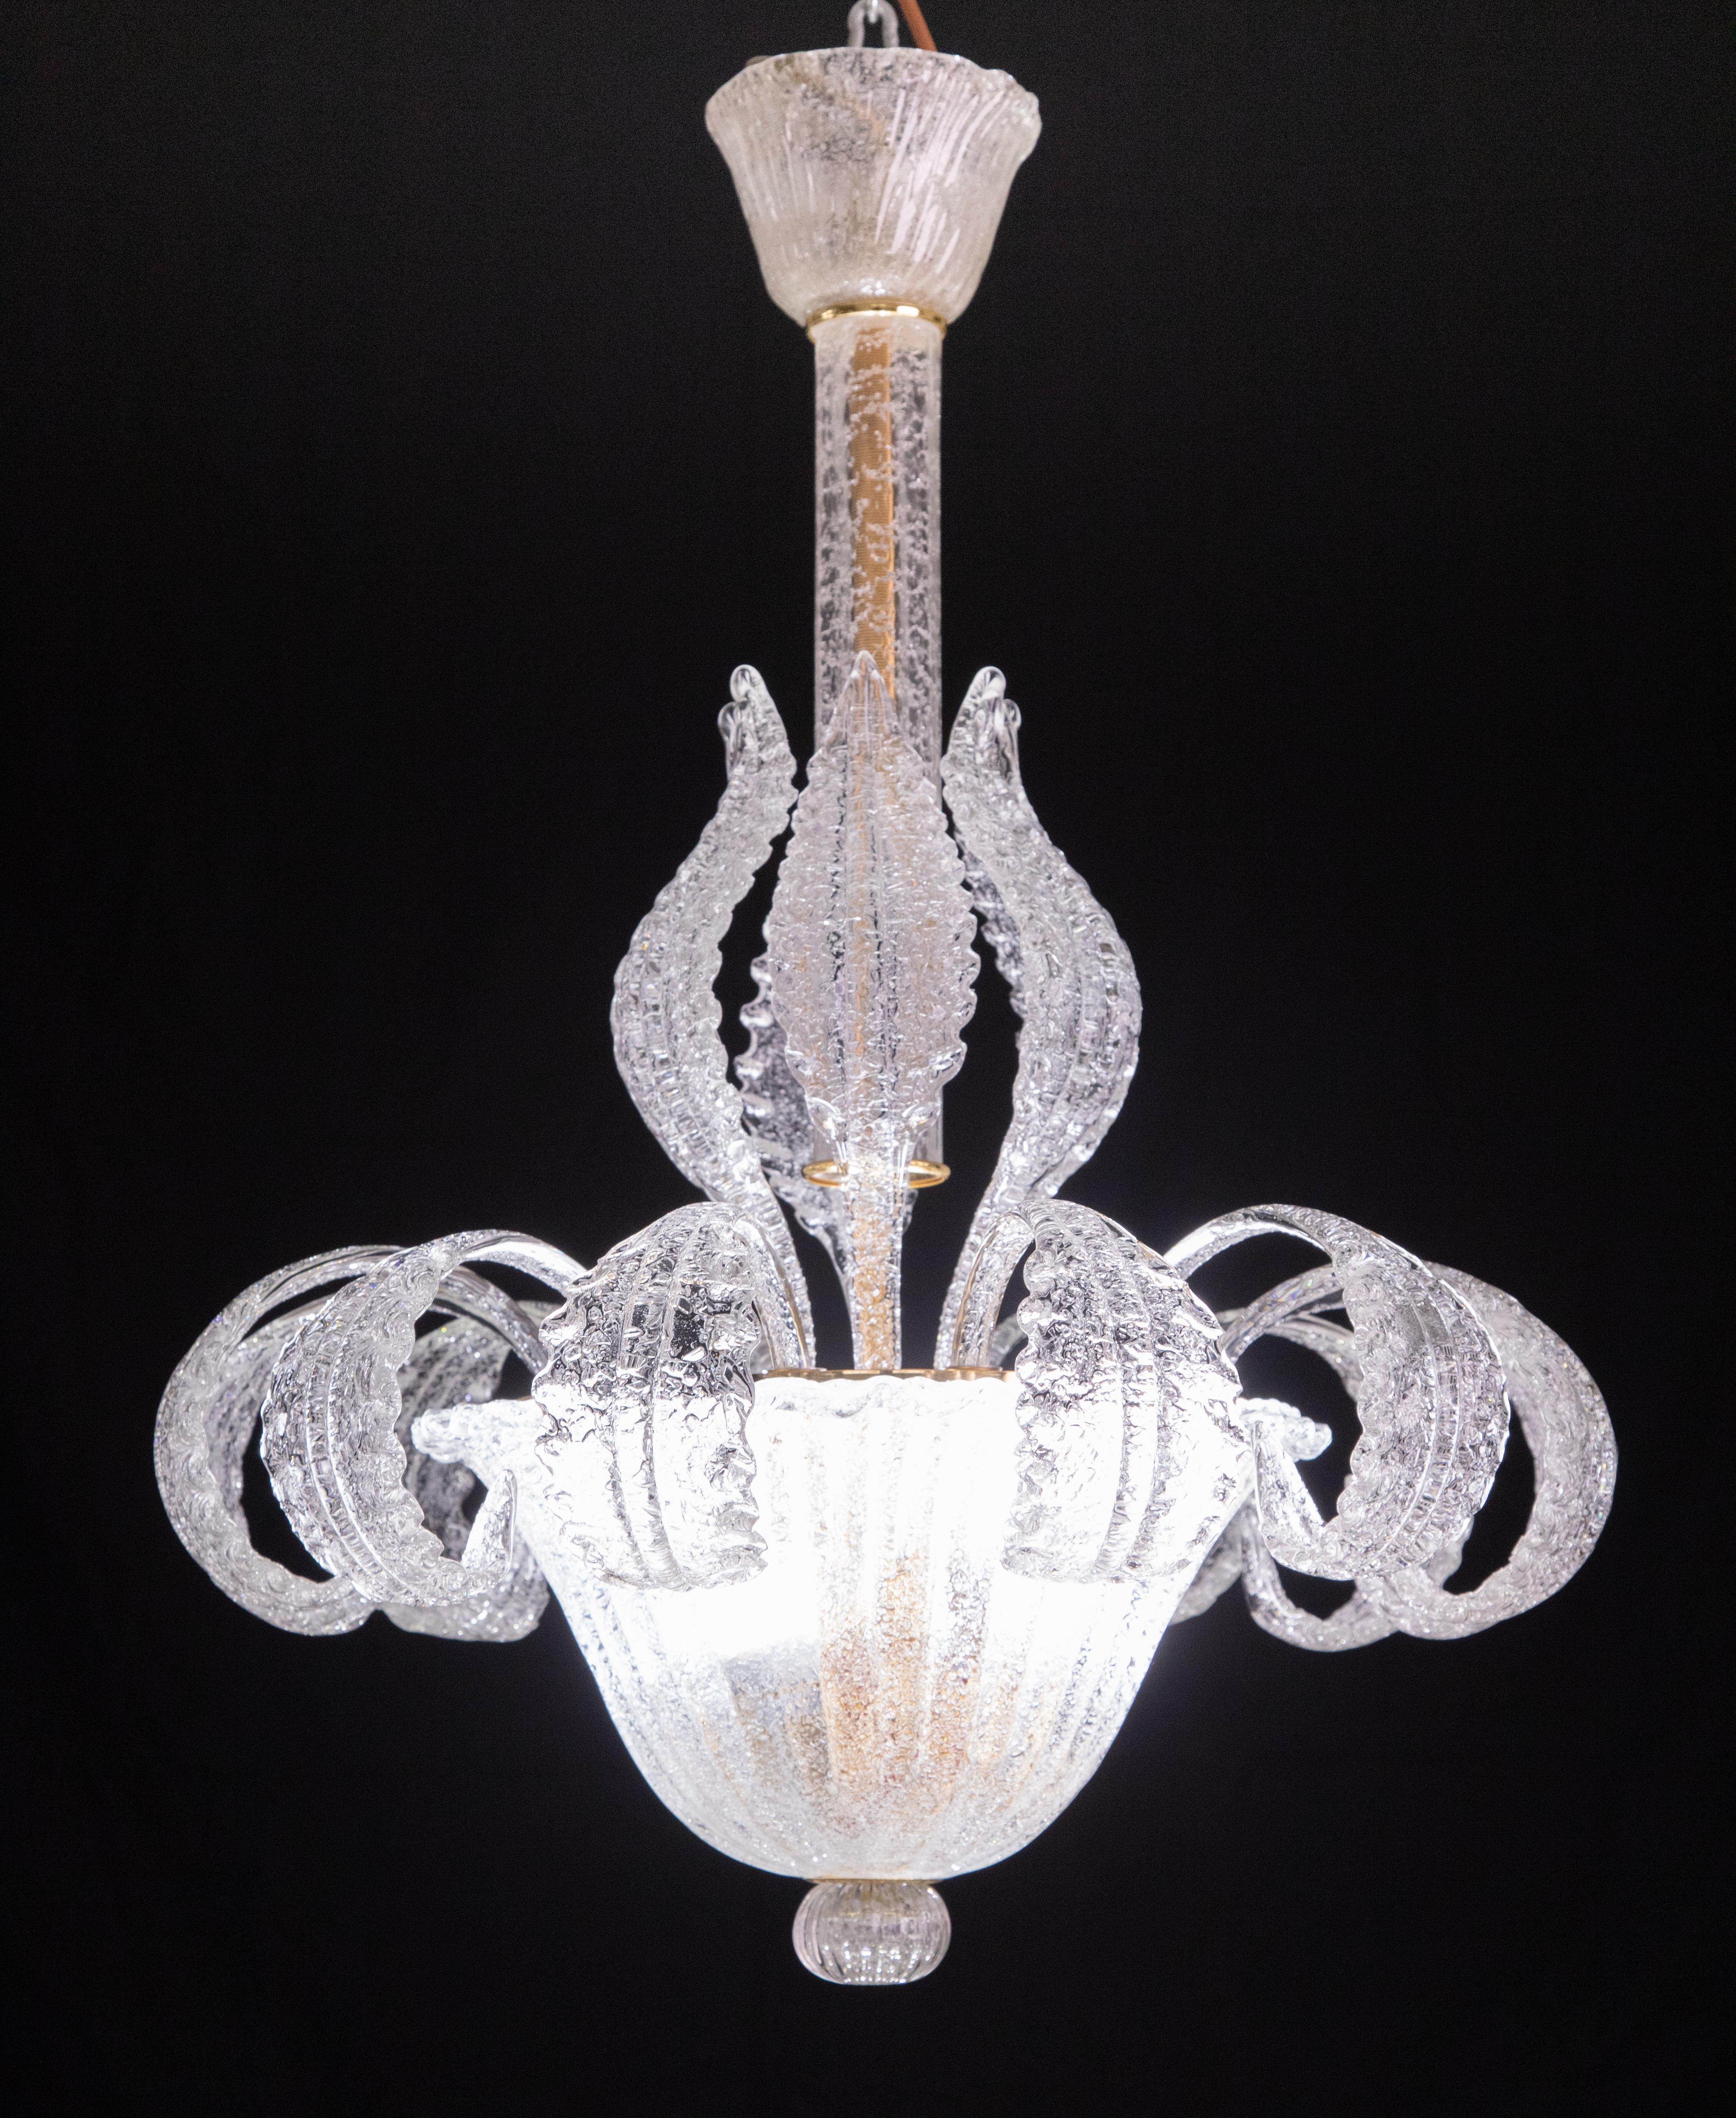 Elegant Murano chandelier composed externally of only glass elements.

The chandelier consists of a rosette, a trunk and a massive central disk, all decorated with 12 beautiful leaves plus 6 tall ones.

The height measures 80 centimeters, the